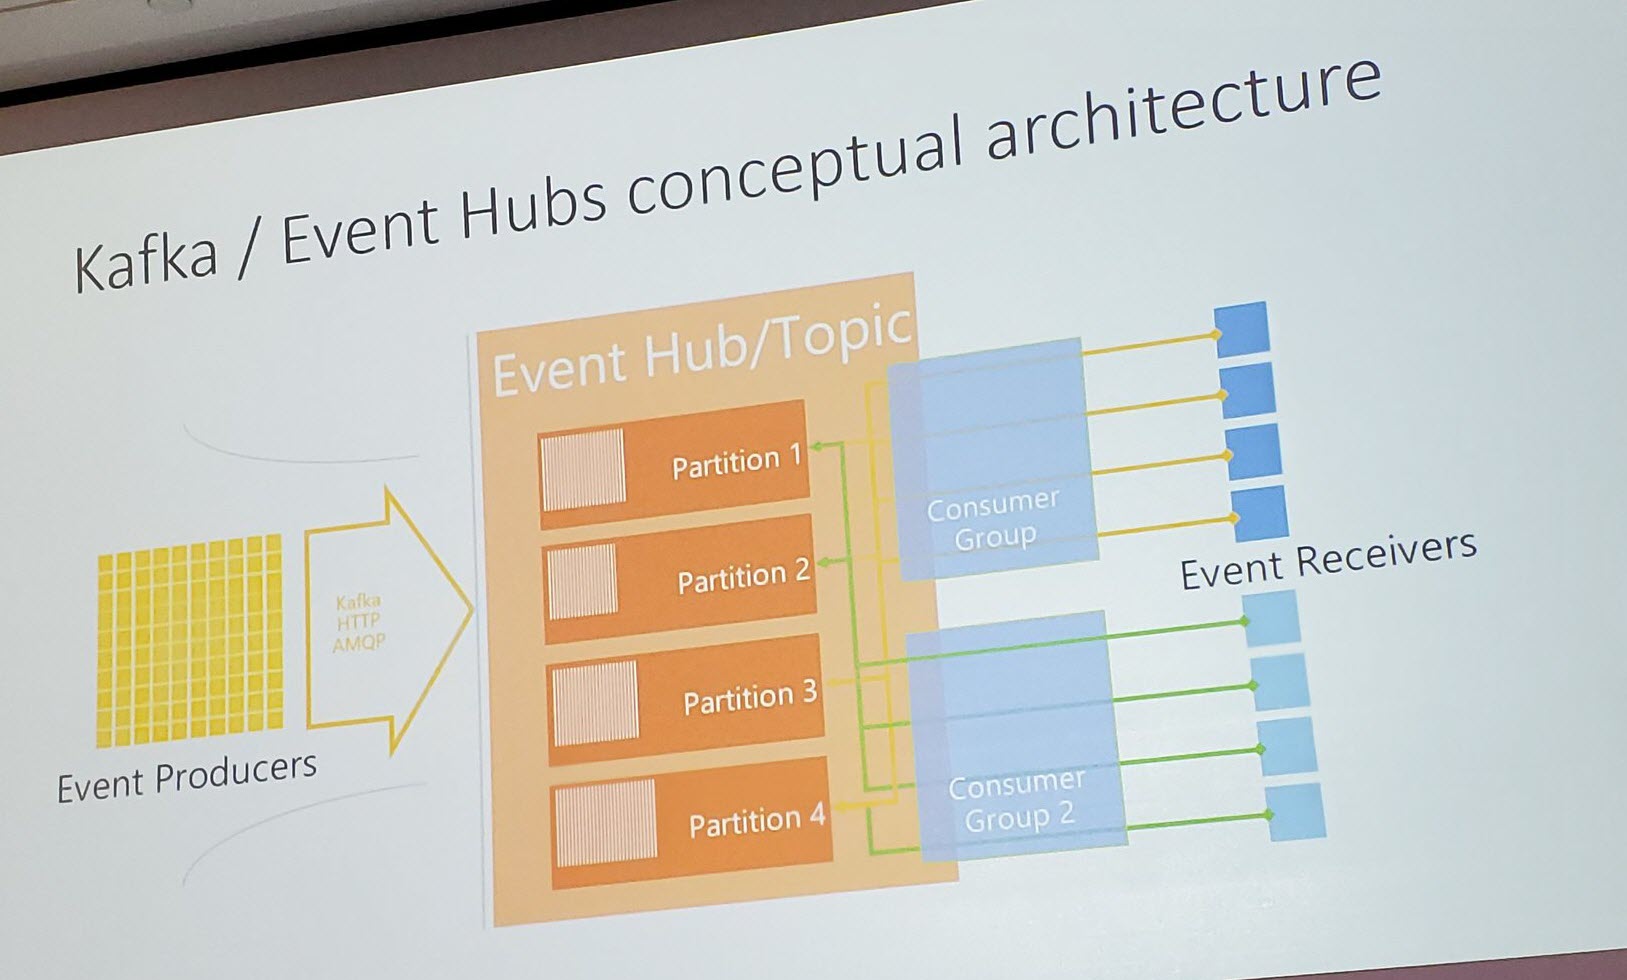 Conceptual architecture of Kafka/ Event Hubs